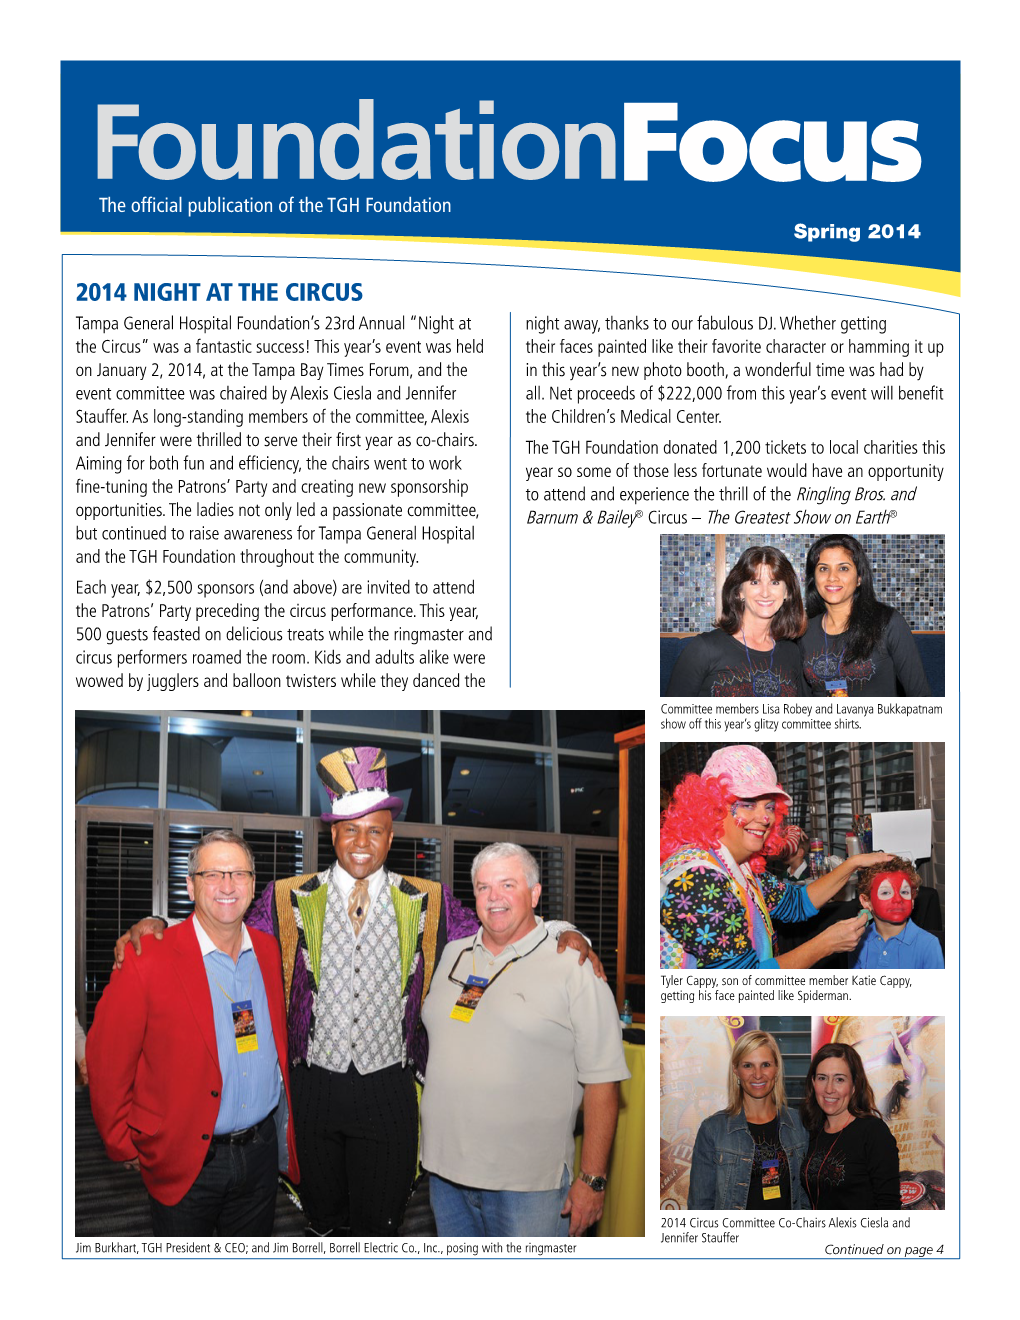 Foundationfocus the Official Publication of the TGH Foundation Spring 2014